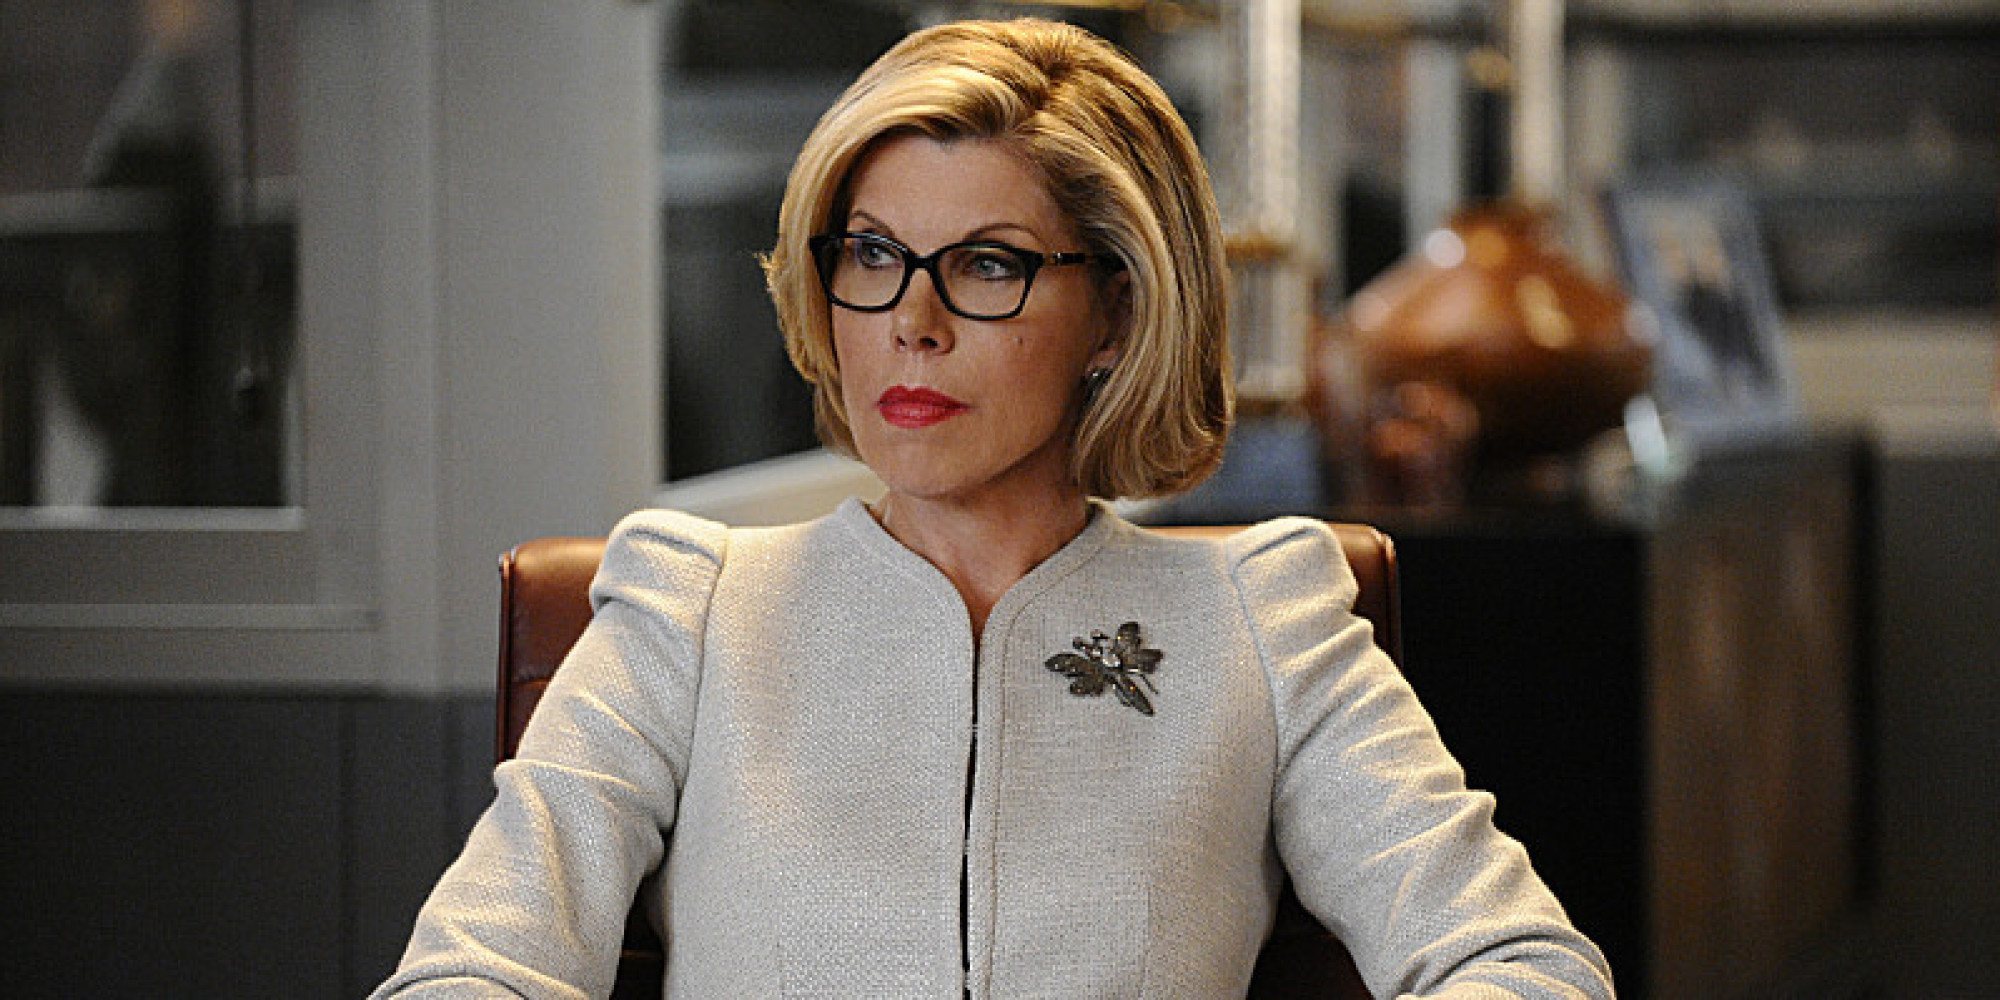 After 'The Good Wife': What's Next for the Cast?